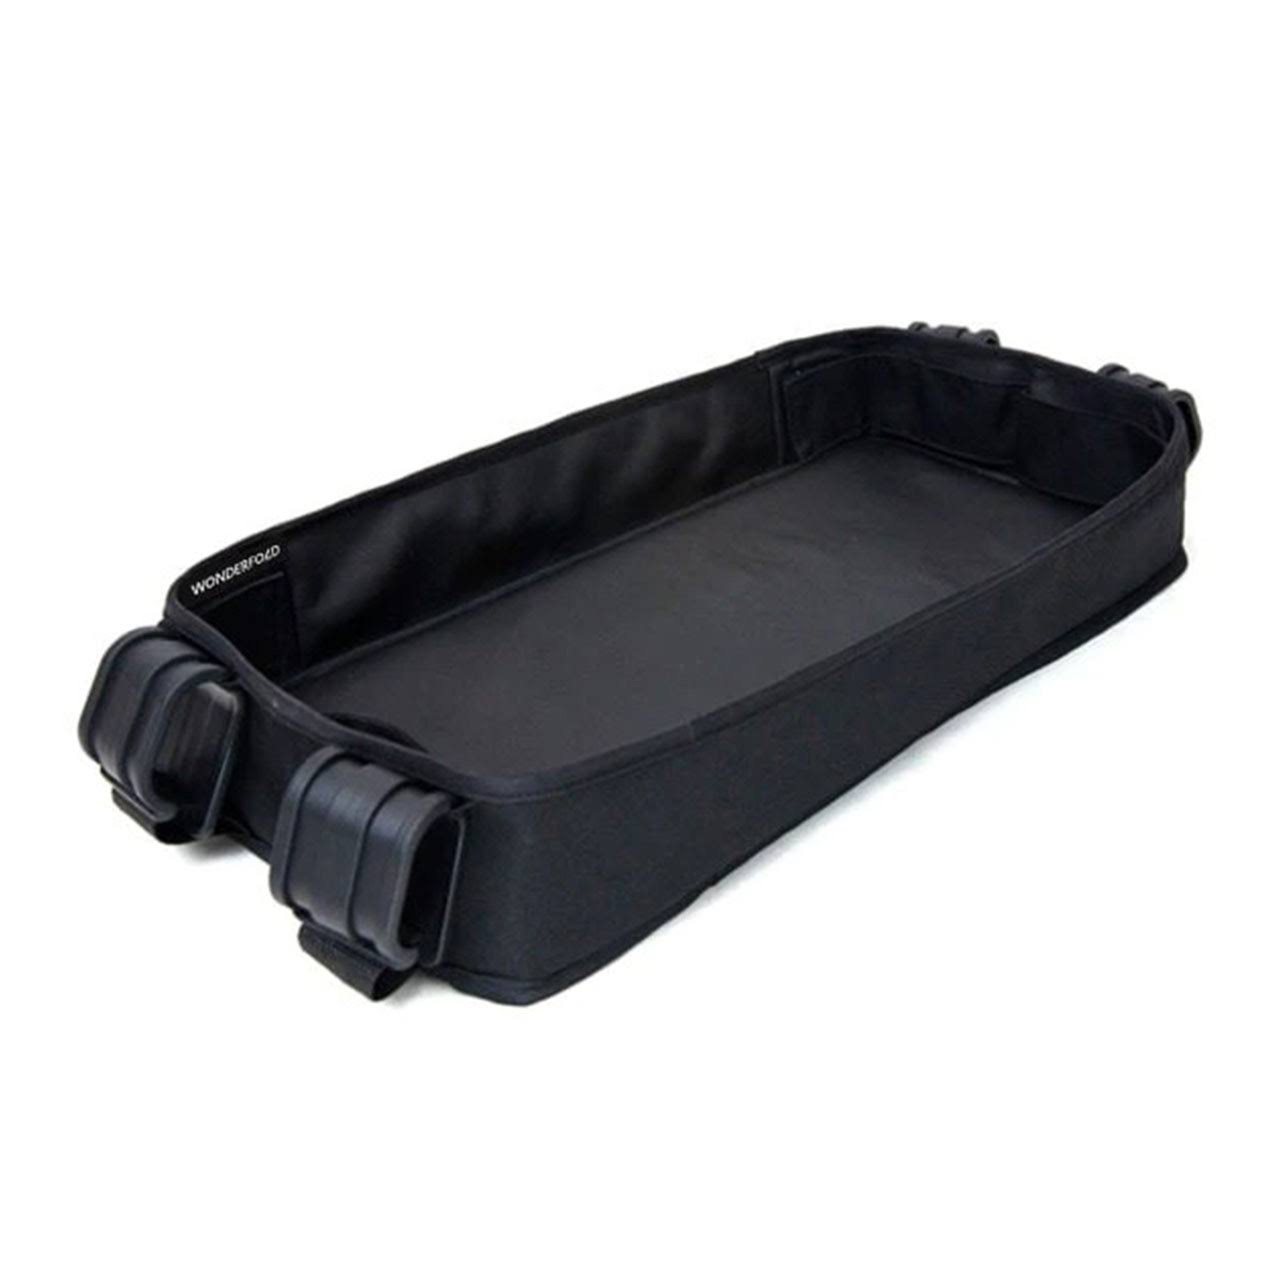 WonderFold Double Sided Stroller Tray for Snacks & Activities Featuring Faux Leather Side for Eating, Polyester Side for Activities, and 4 Kid’s Cup